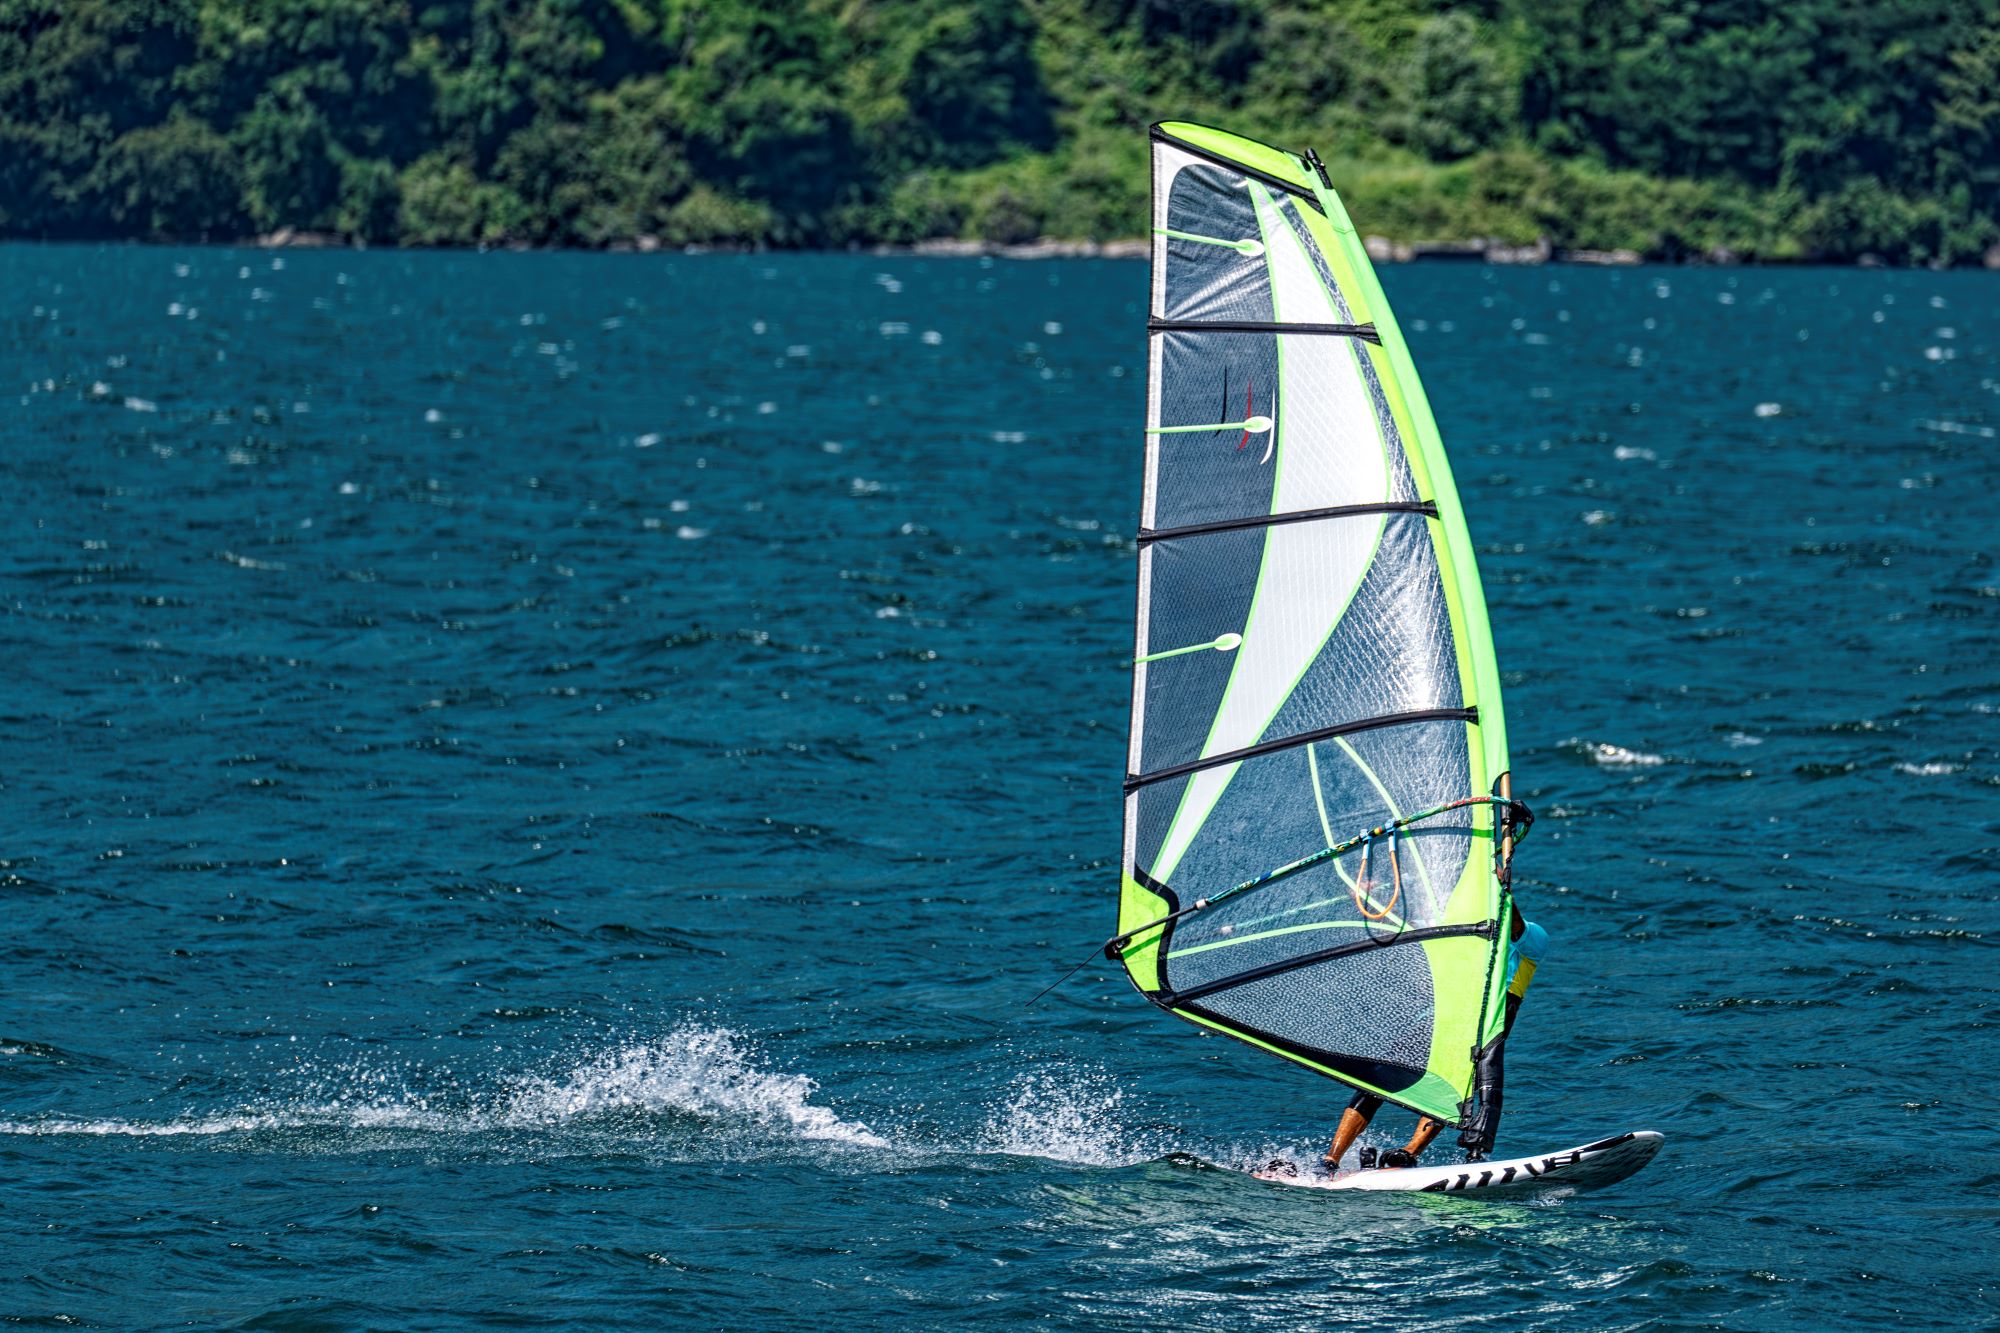 The wind always blows in Torbole, making it globally recognized by windsurfing enthusiasts